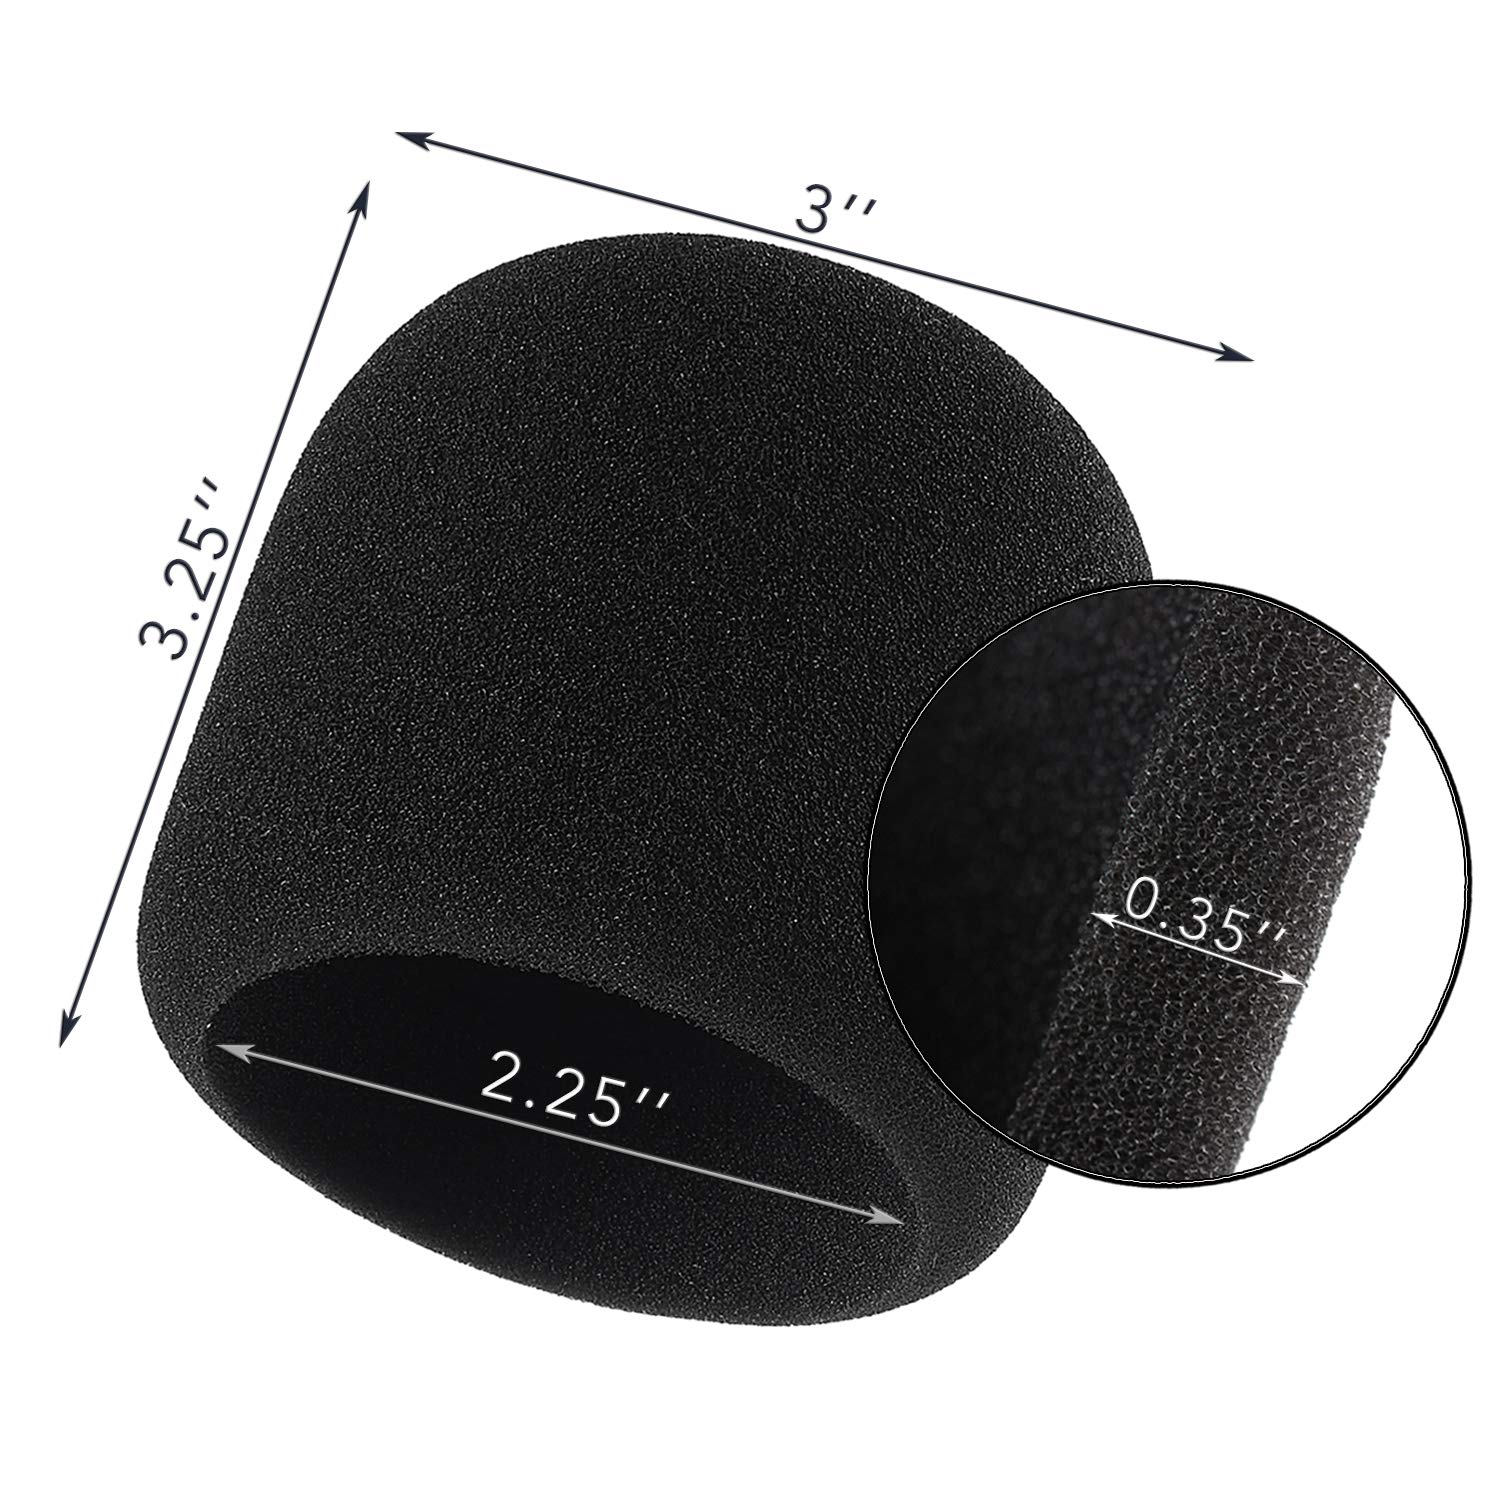 Sound Addicted - Foam Cover Windscreen for Blue Yeti mic's | Perfect fit for Yeti PRO Condenser Microphones